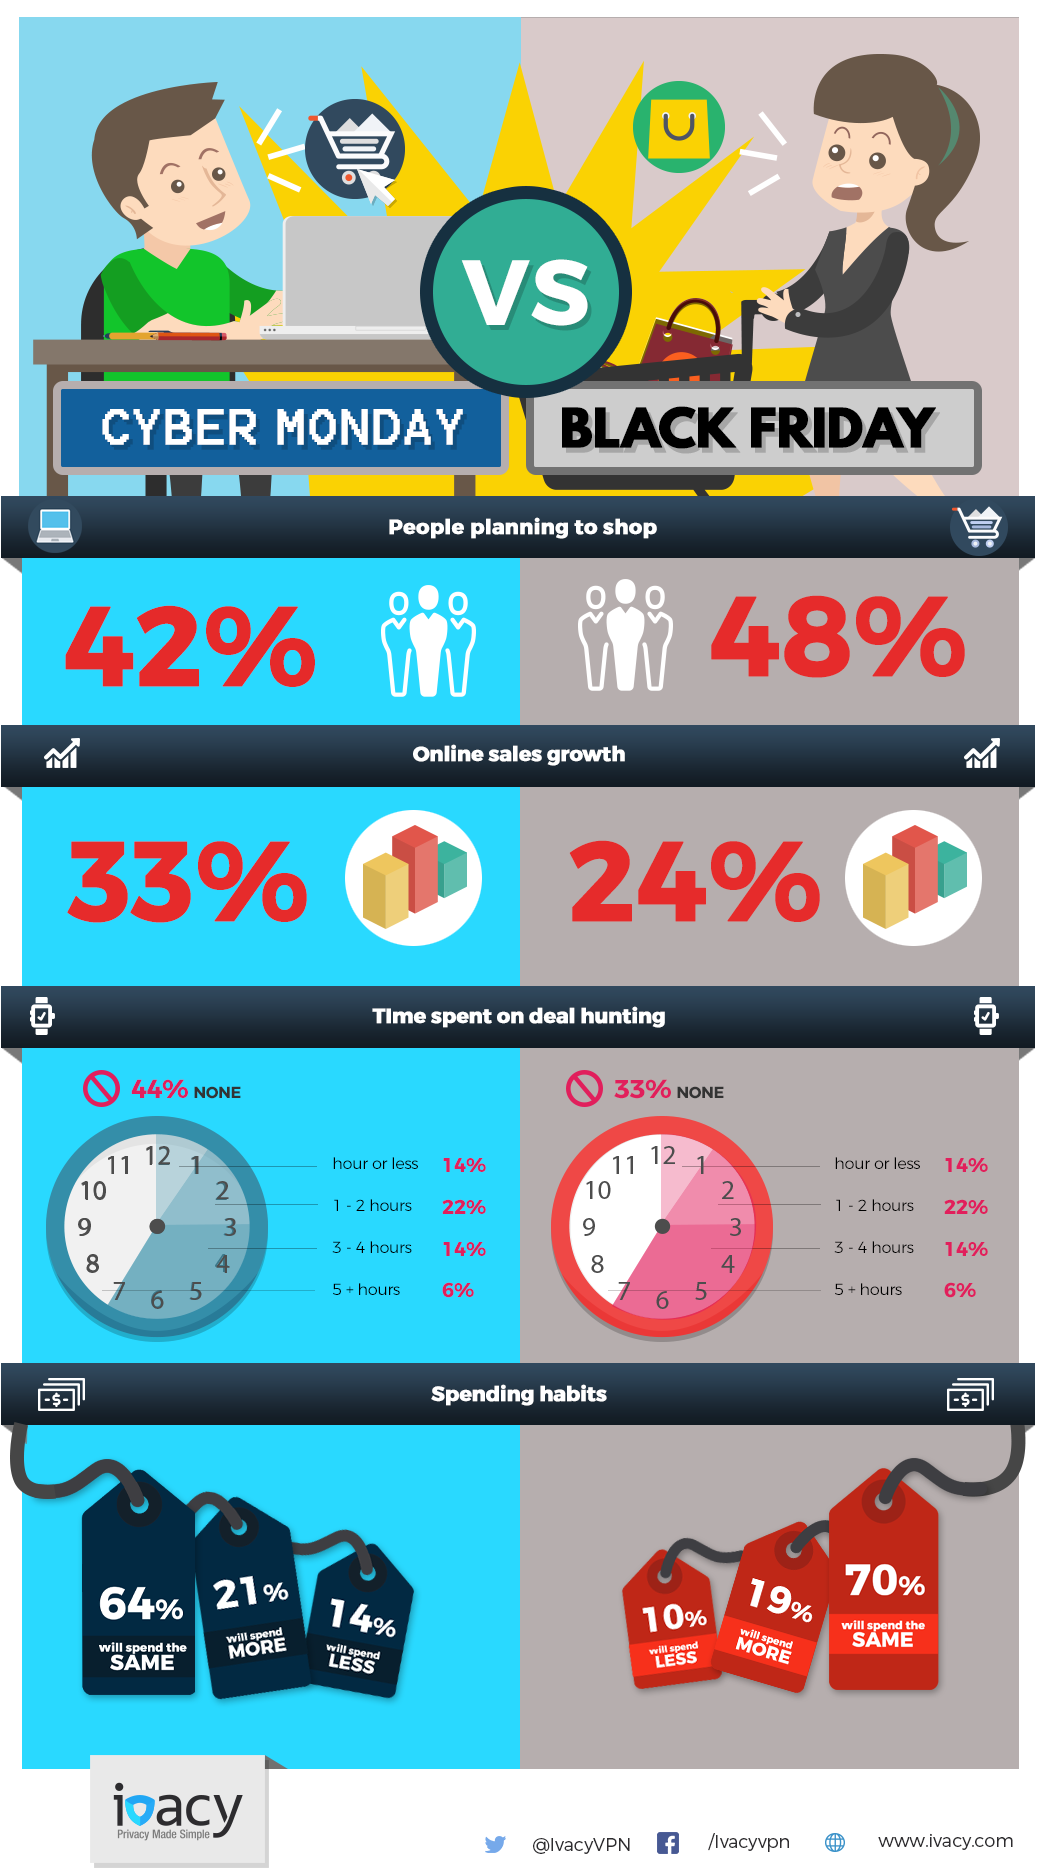 Black Friday vs. Cyber Monday Showdown - The Battle for Online Buyers